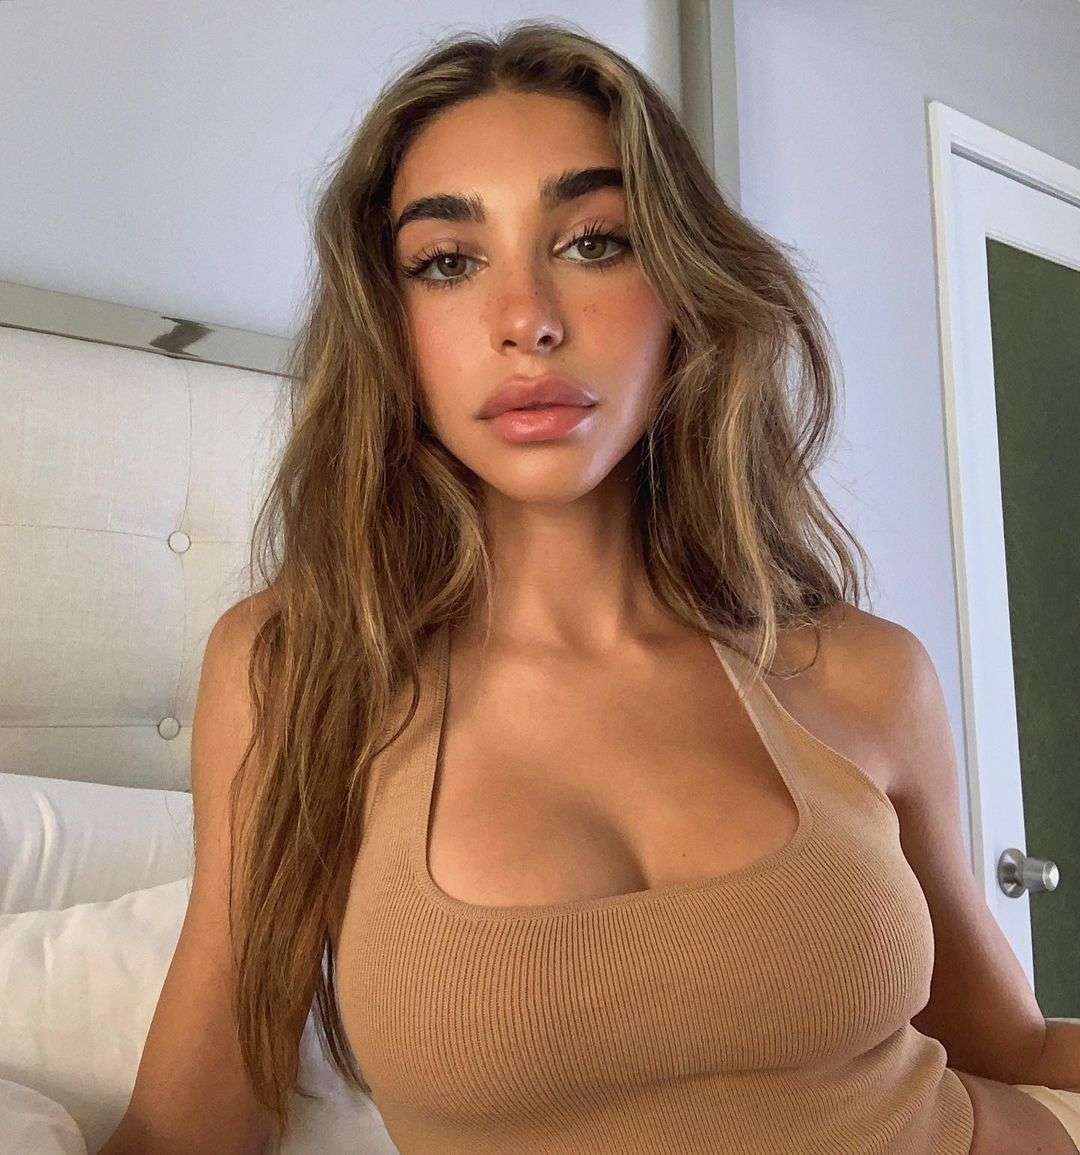 65+ Hot Pictures Of Chantel Jeffries Unravel Her Sexy Side To The World | Best Of Comic Books